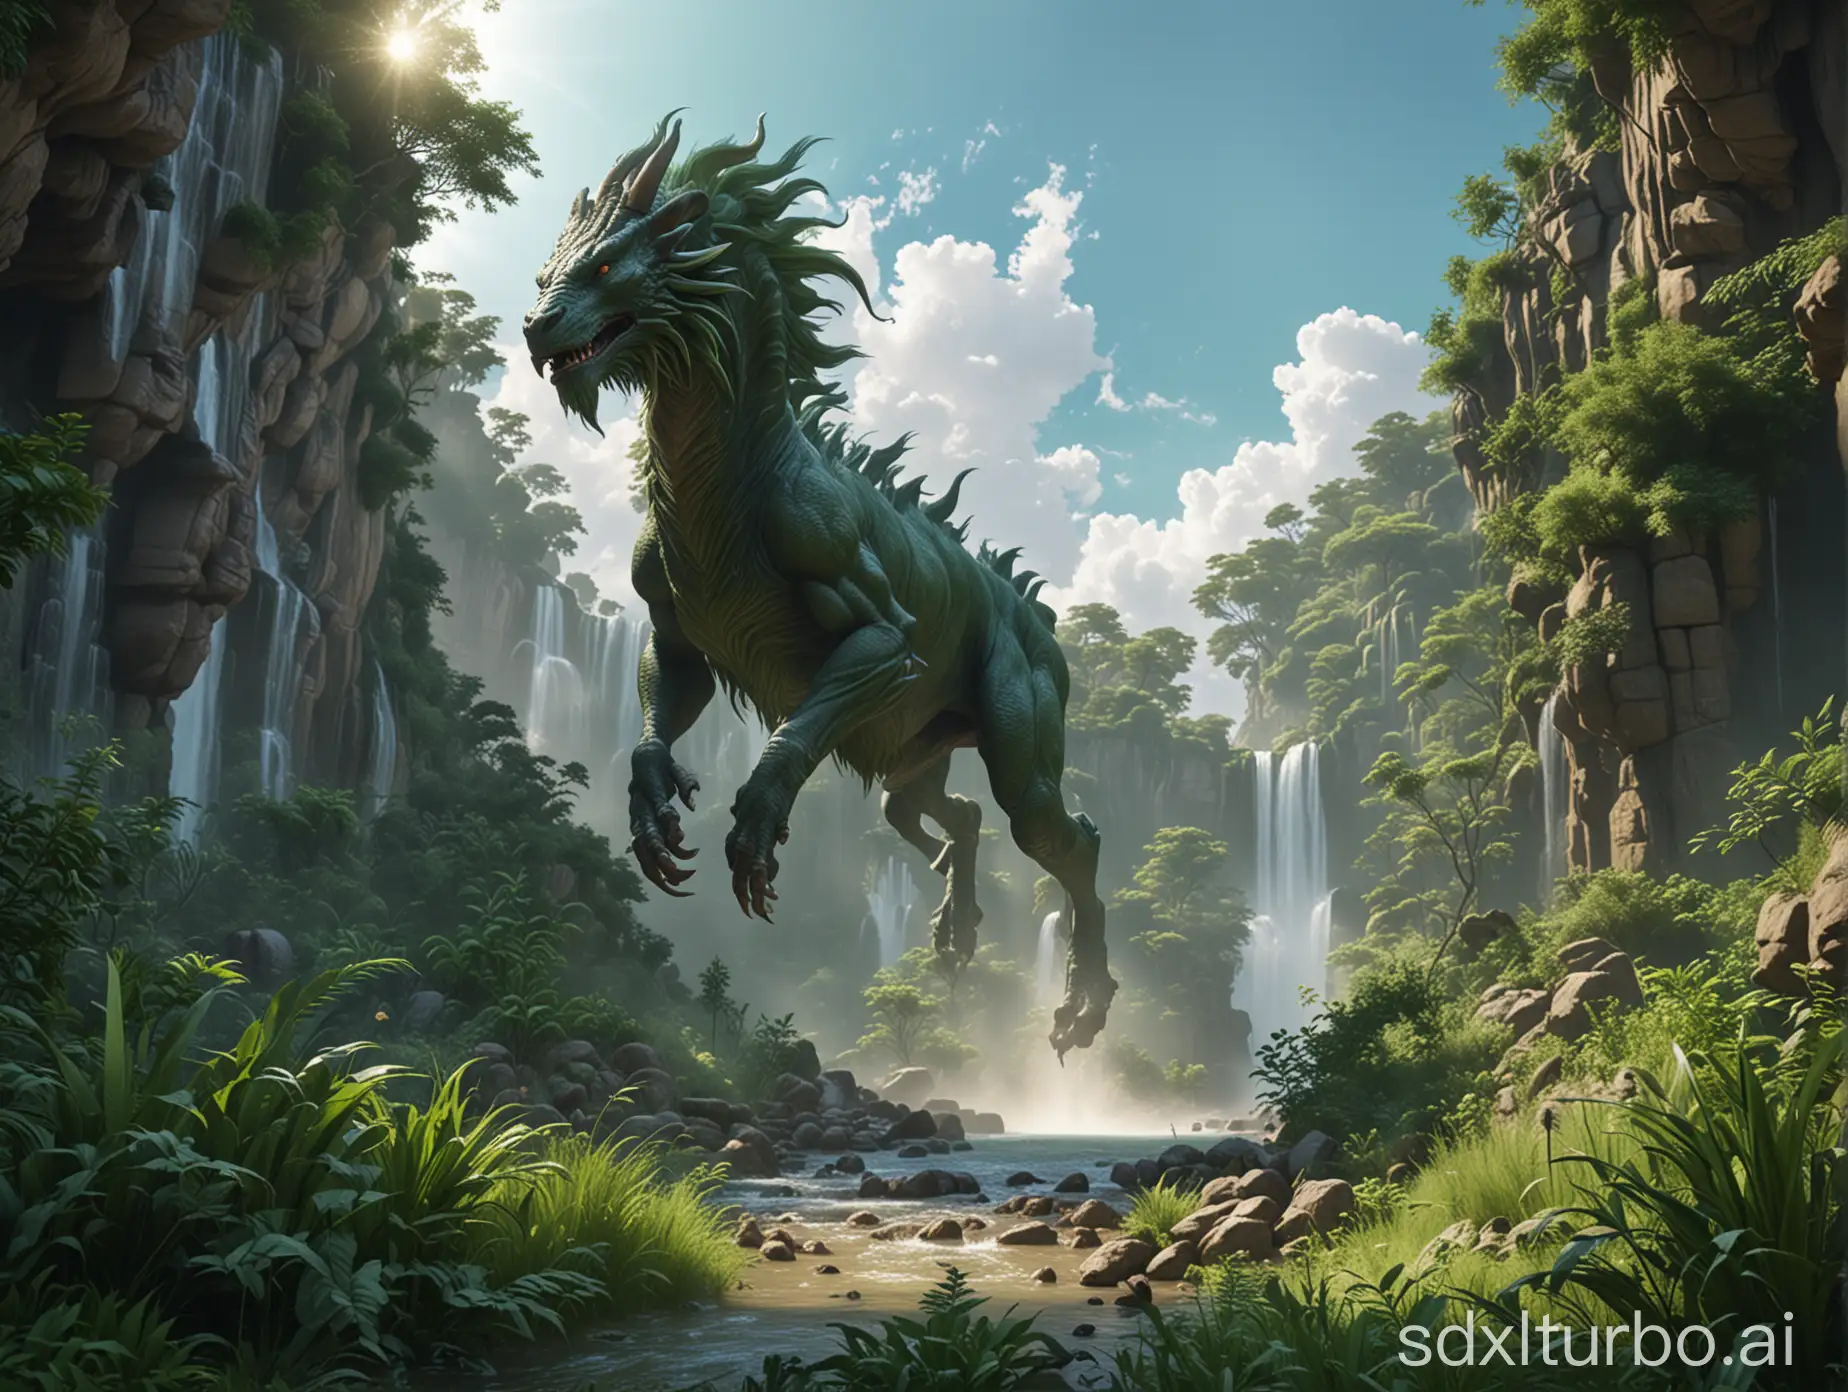 Vibrant-Oriental-Landscape-with-Tall-Waterfall-and-Creature